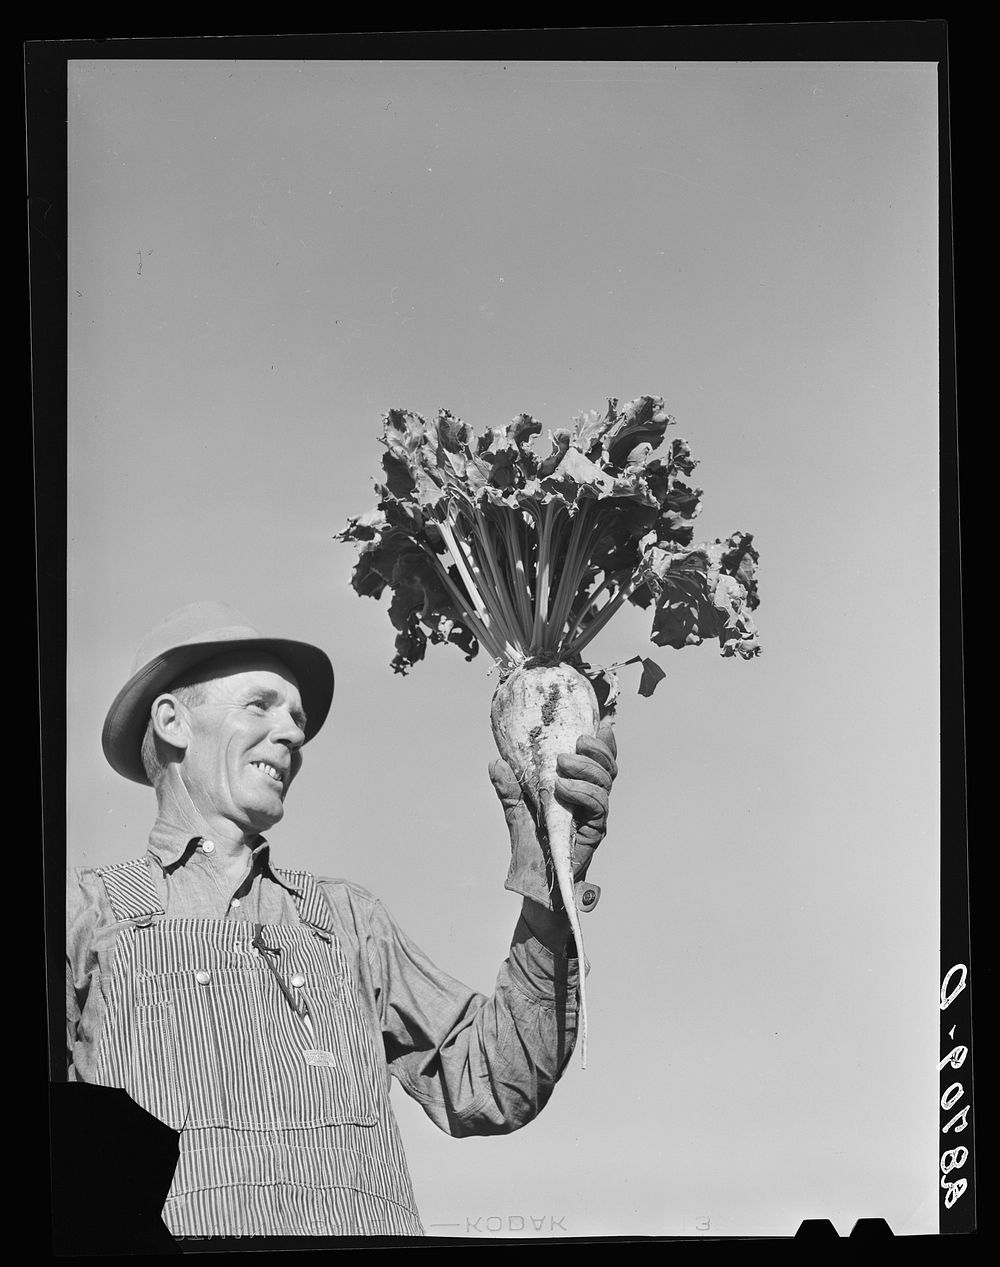 August Ehlen, farmer, with sugar beet. Adams County, Colorado. Sourced from the Library of Congress.